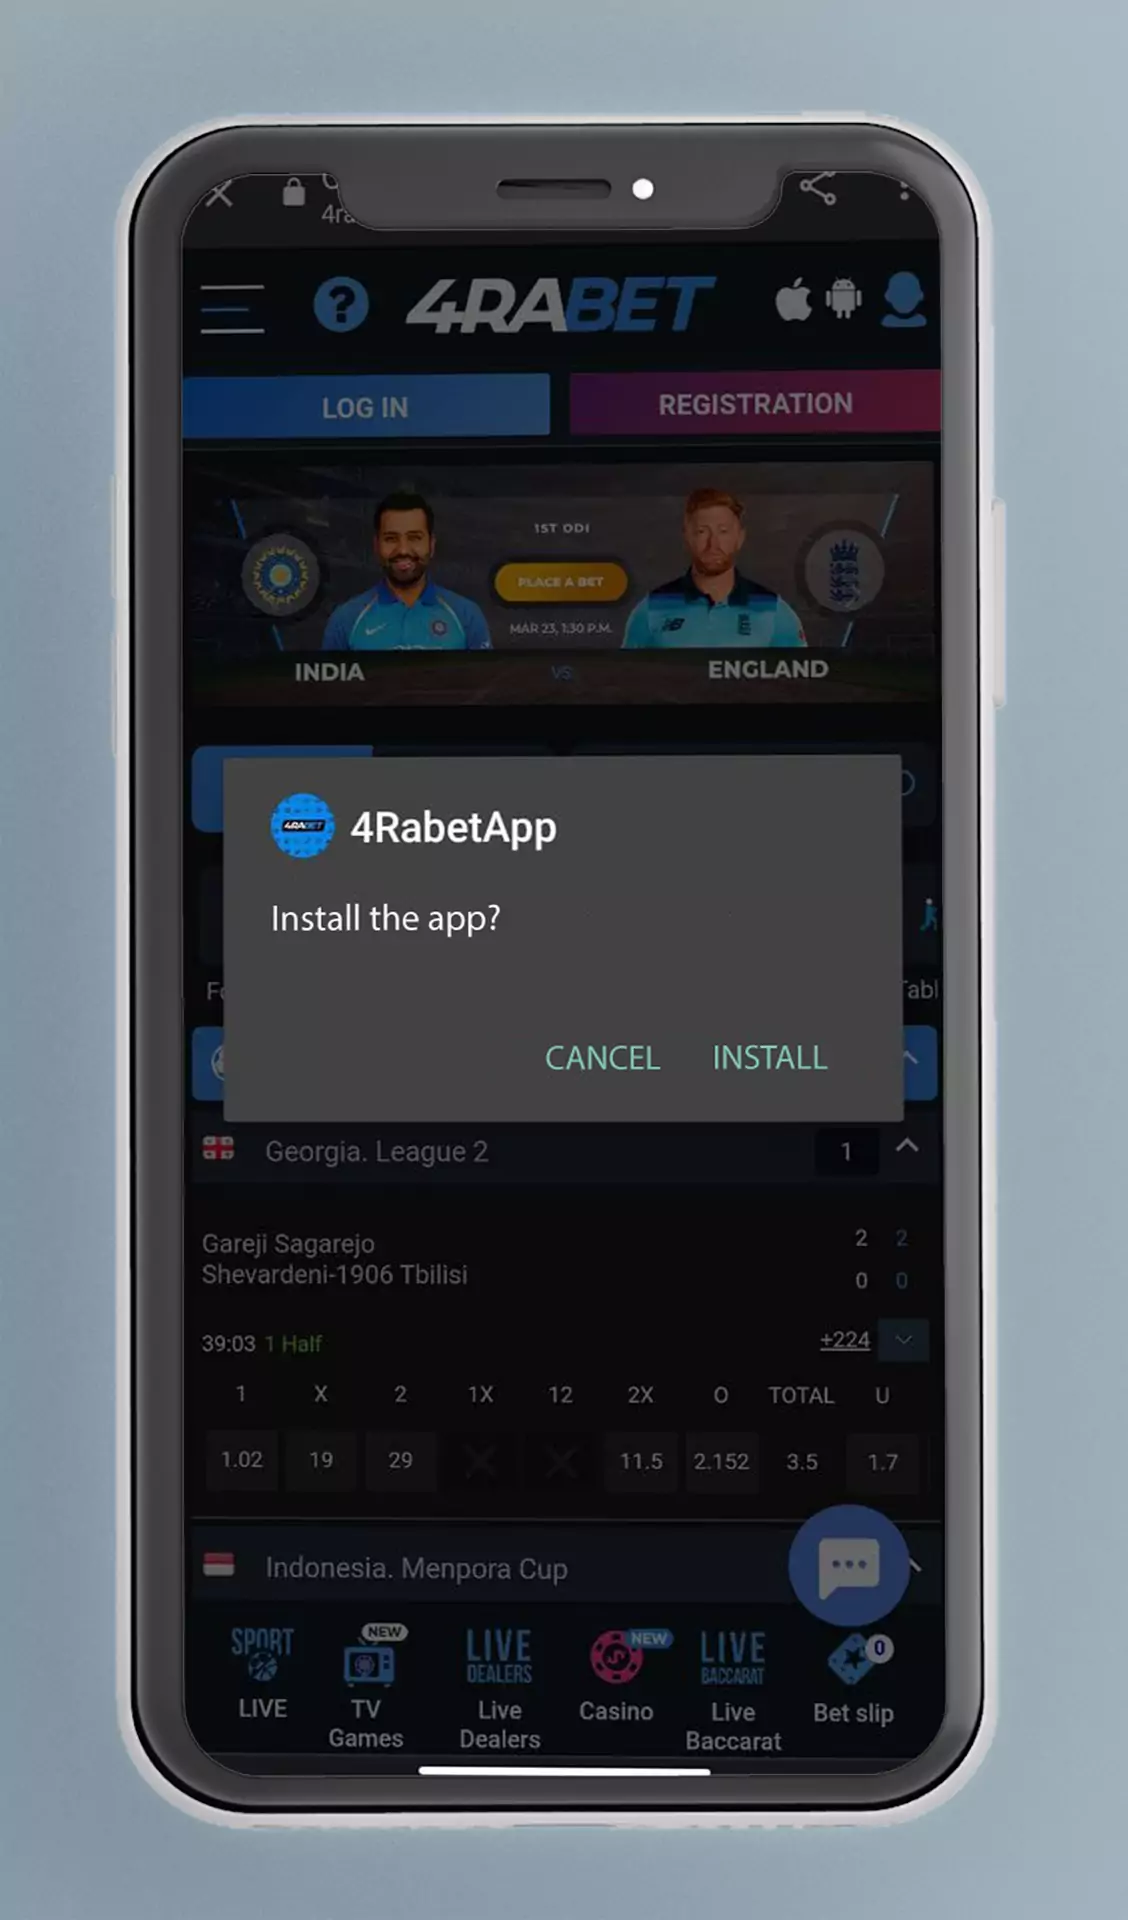 Install the app and start betting on cricket at 4rabet app.